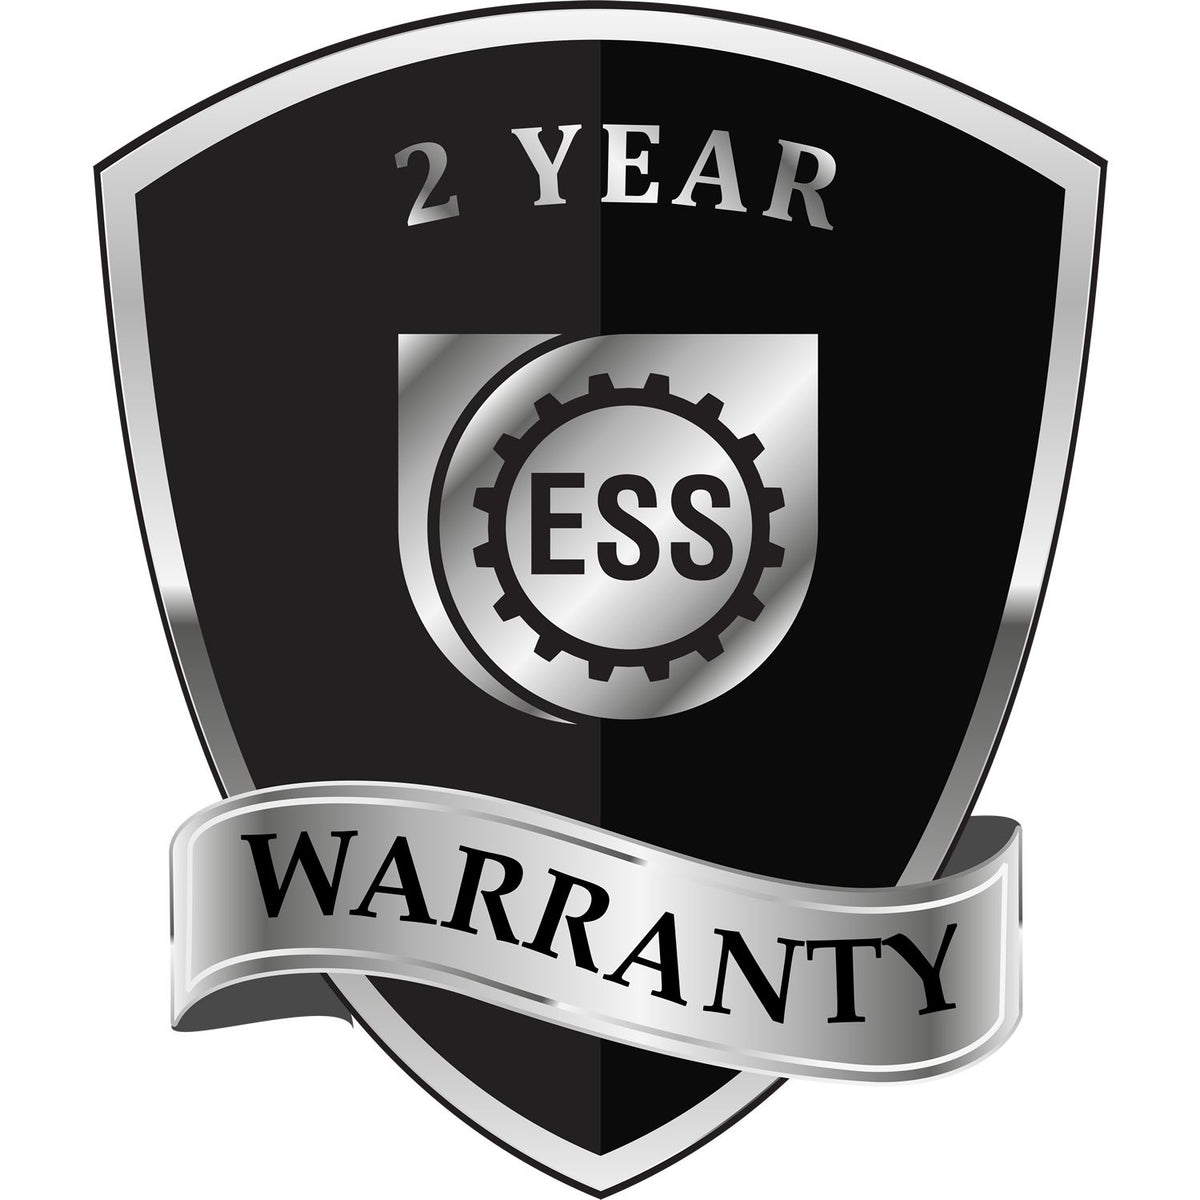 A badge or emblem showing a warranty icon for the Heavy Duty Cast Iron Maryland Engineer Seal Embosser